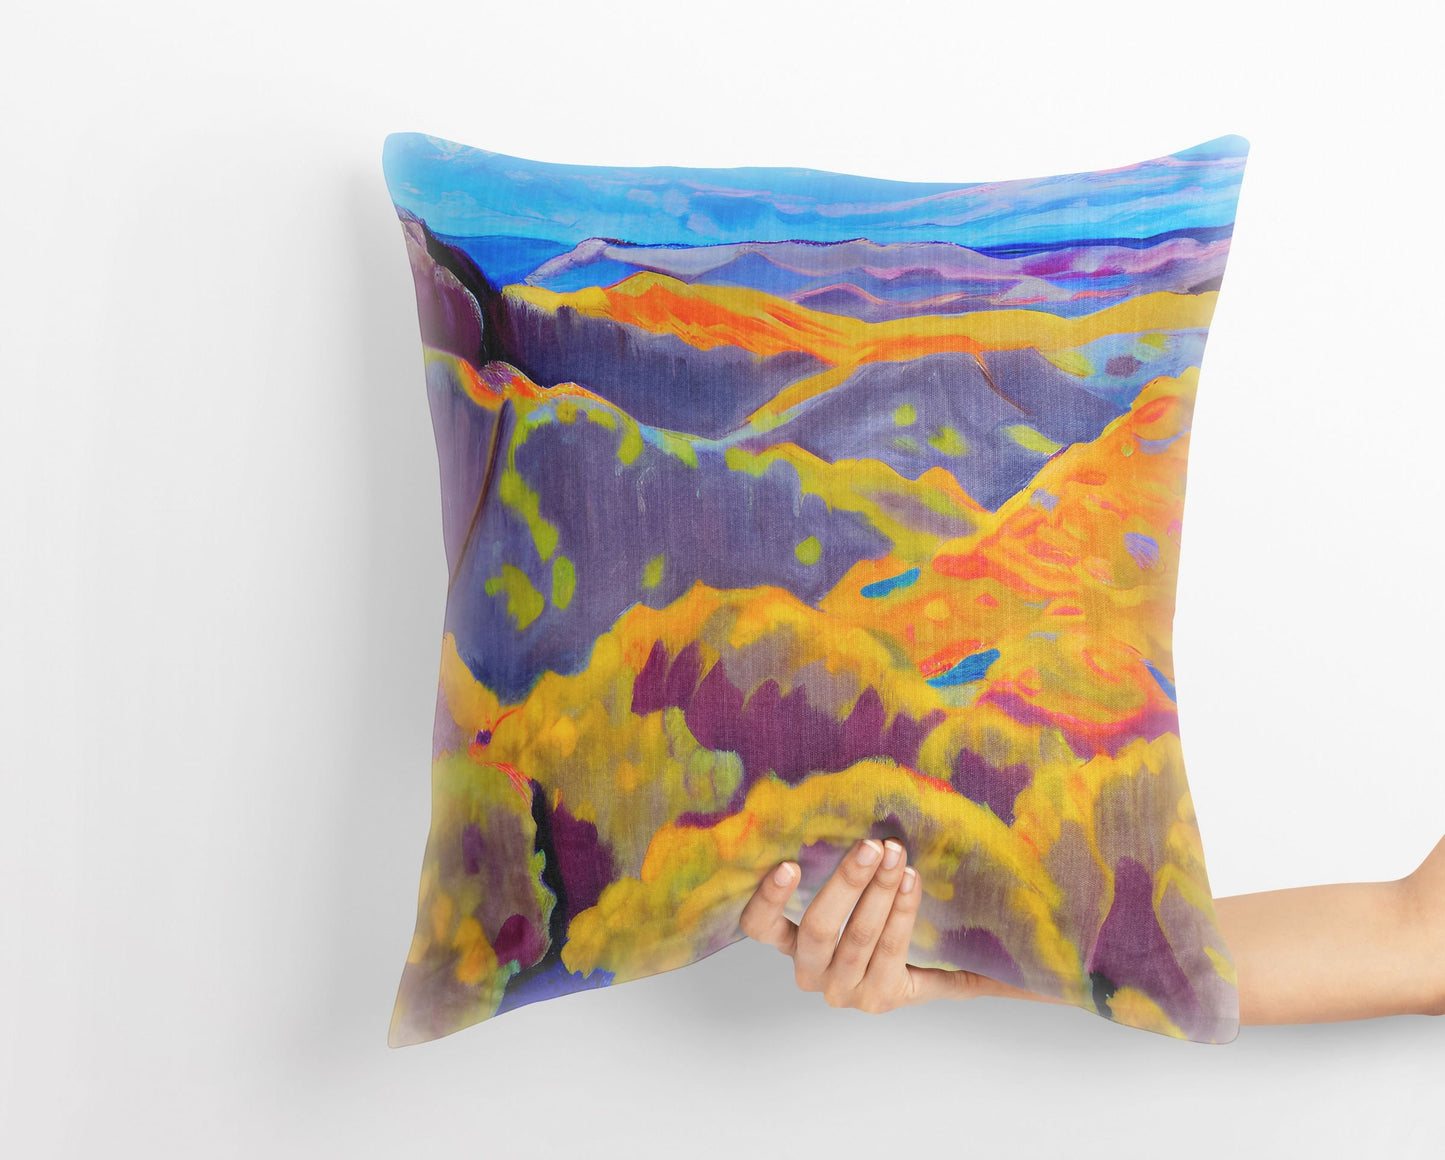 Landscape With Mountains, Pillow Case, Abstract Throw Pillow, Artist Pillow, Fashion, Square Pillow, Farmhouse Pillow, Indoor Pillow Cases